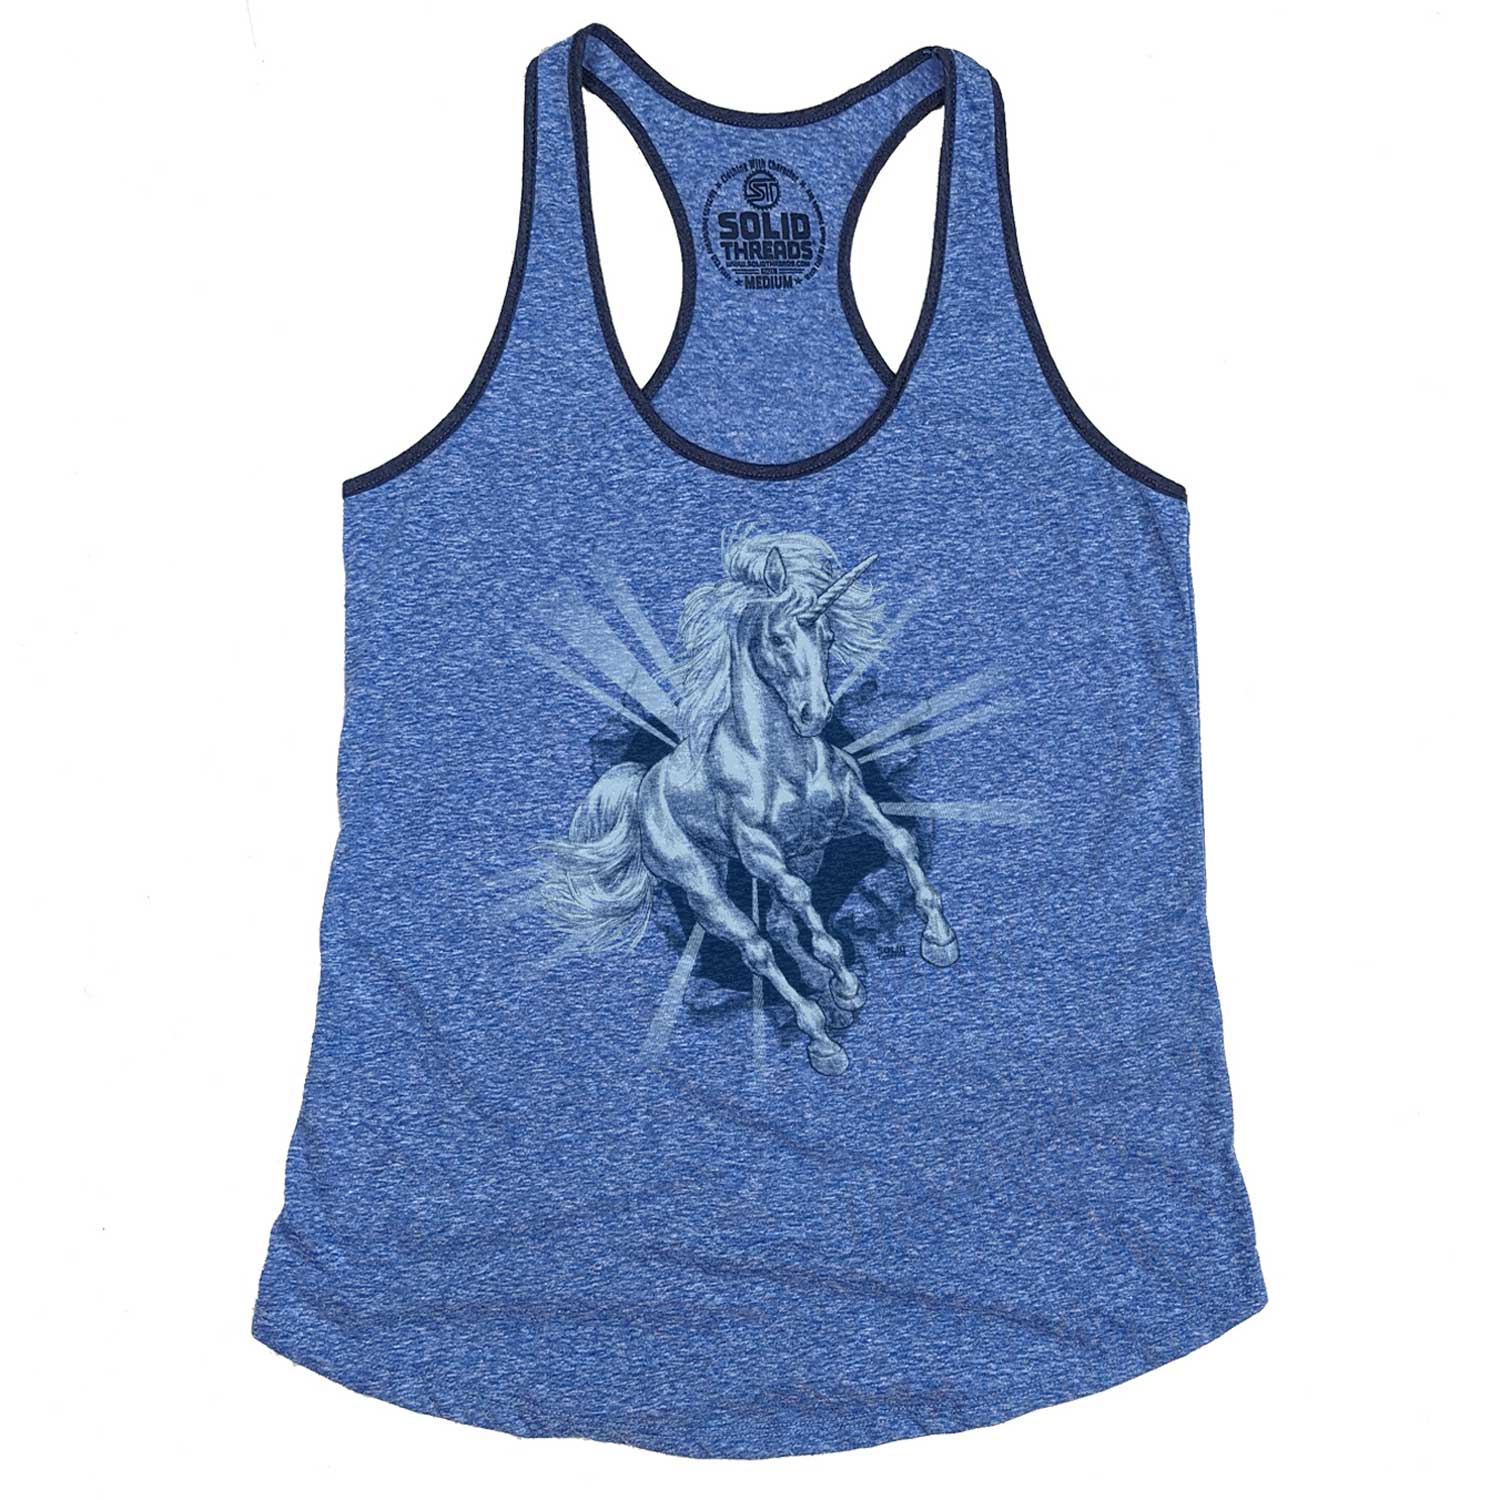 Women's Unicorn Chest Vintage Graphic Tank Top | Funny Mythical T-shirt | Solid Threads